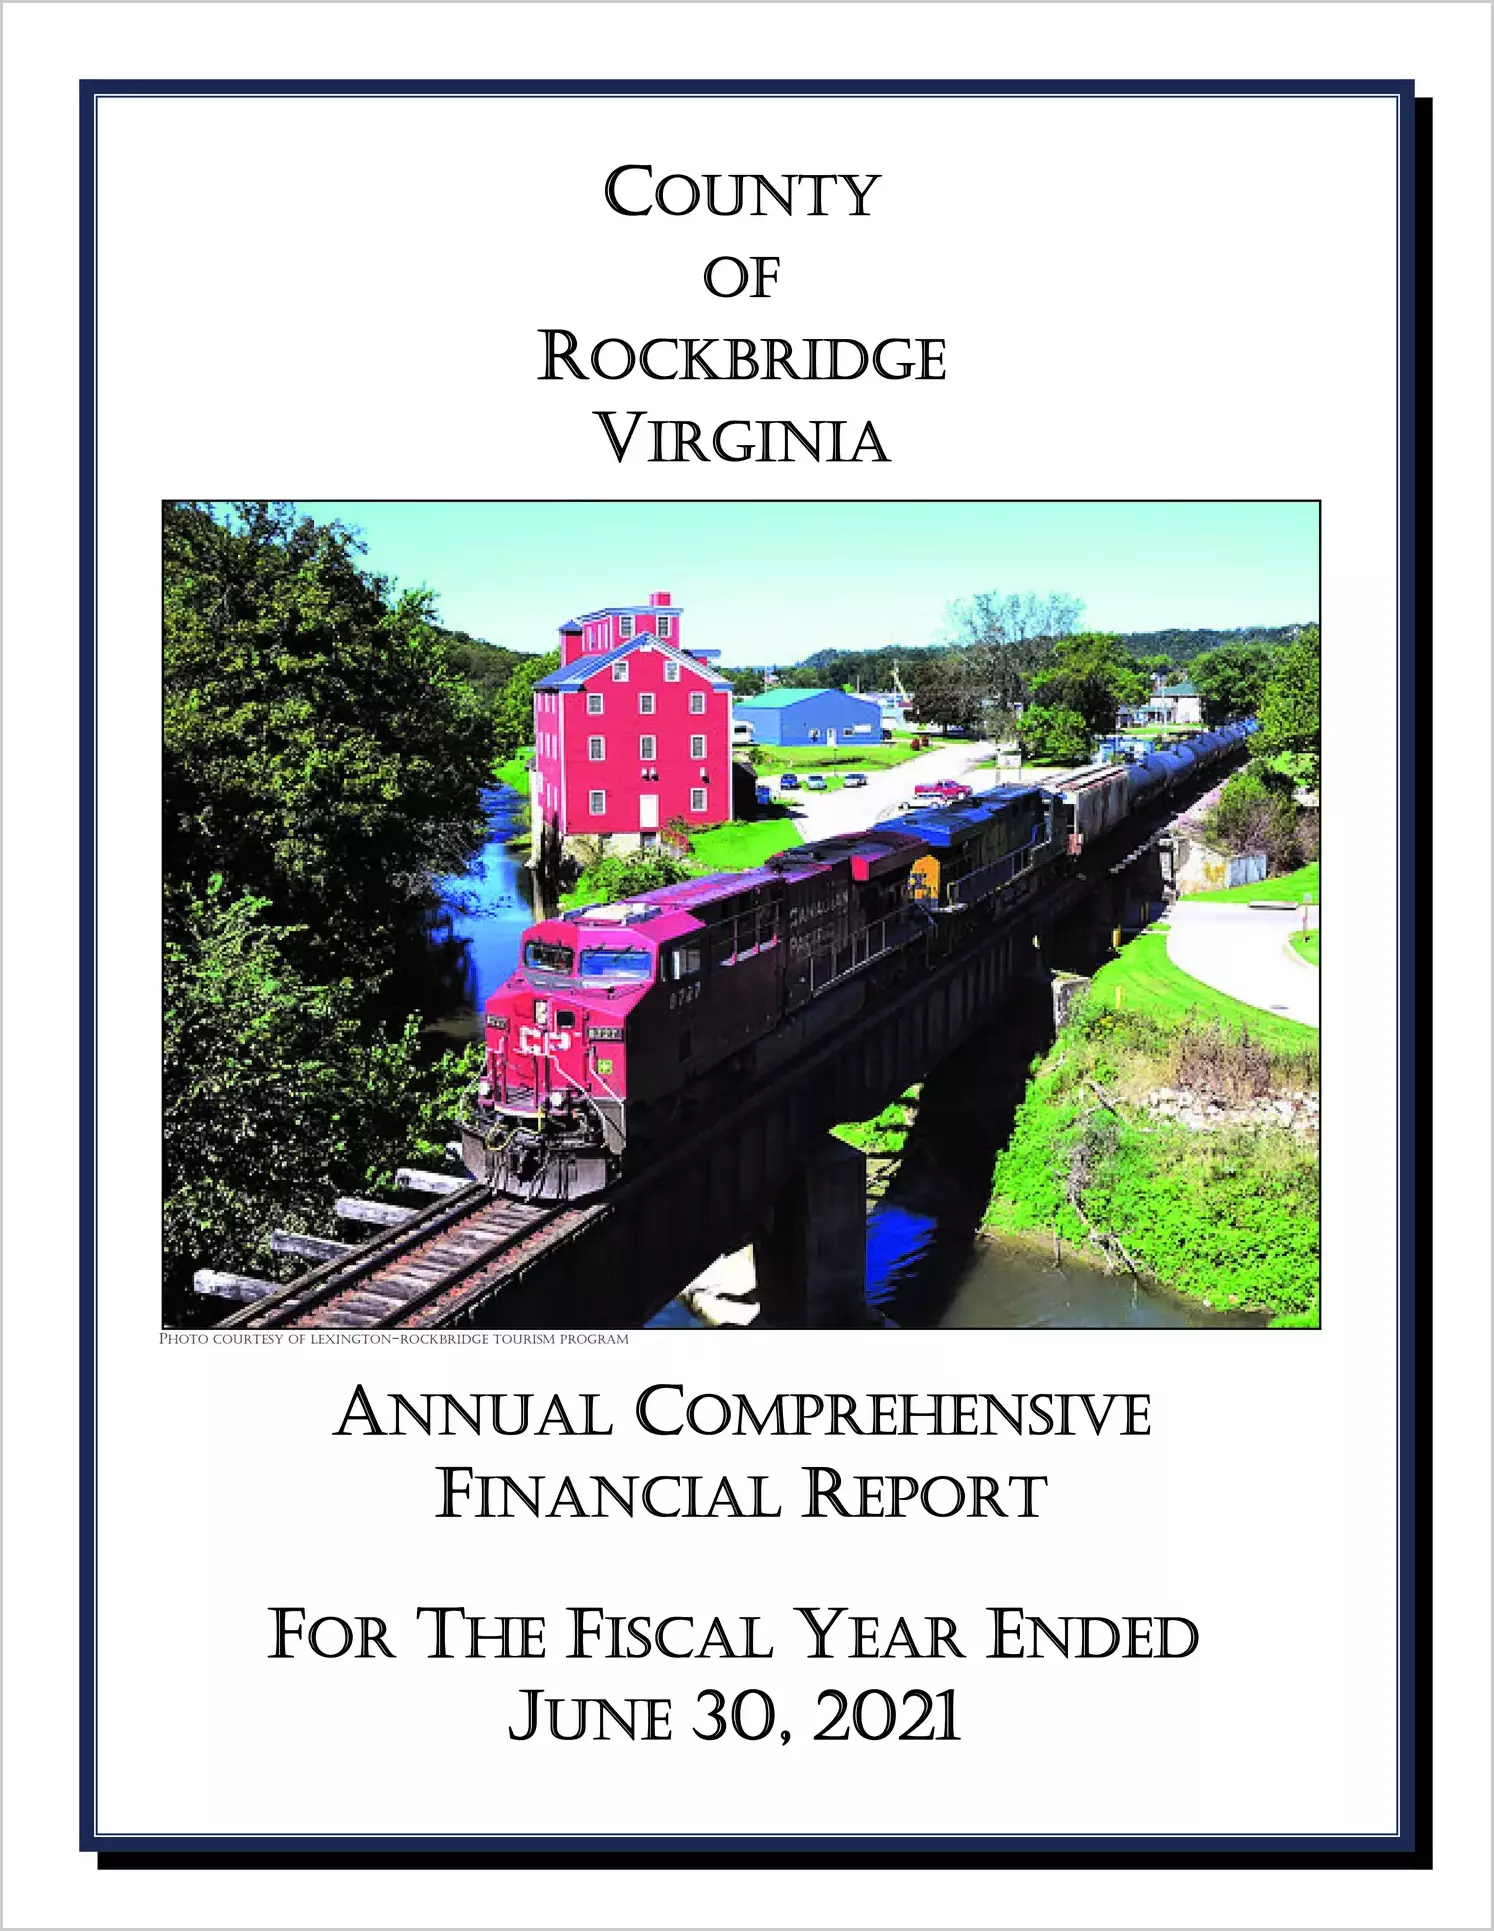 2021 Annual Financial Report for County of Rockbridge